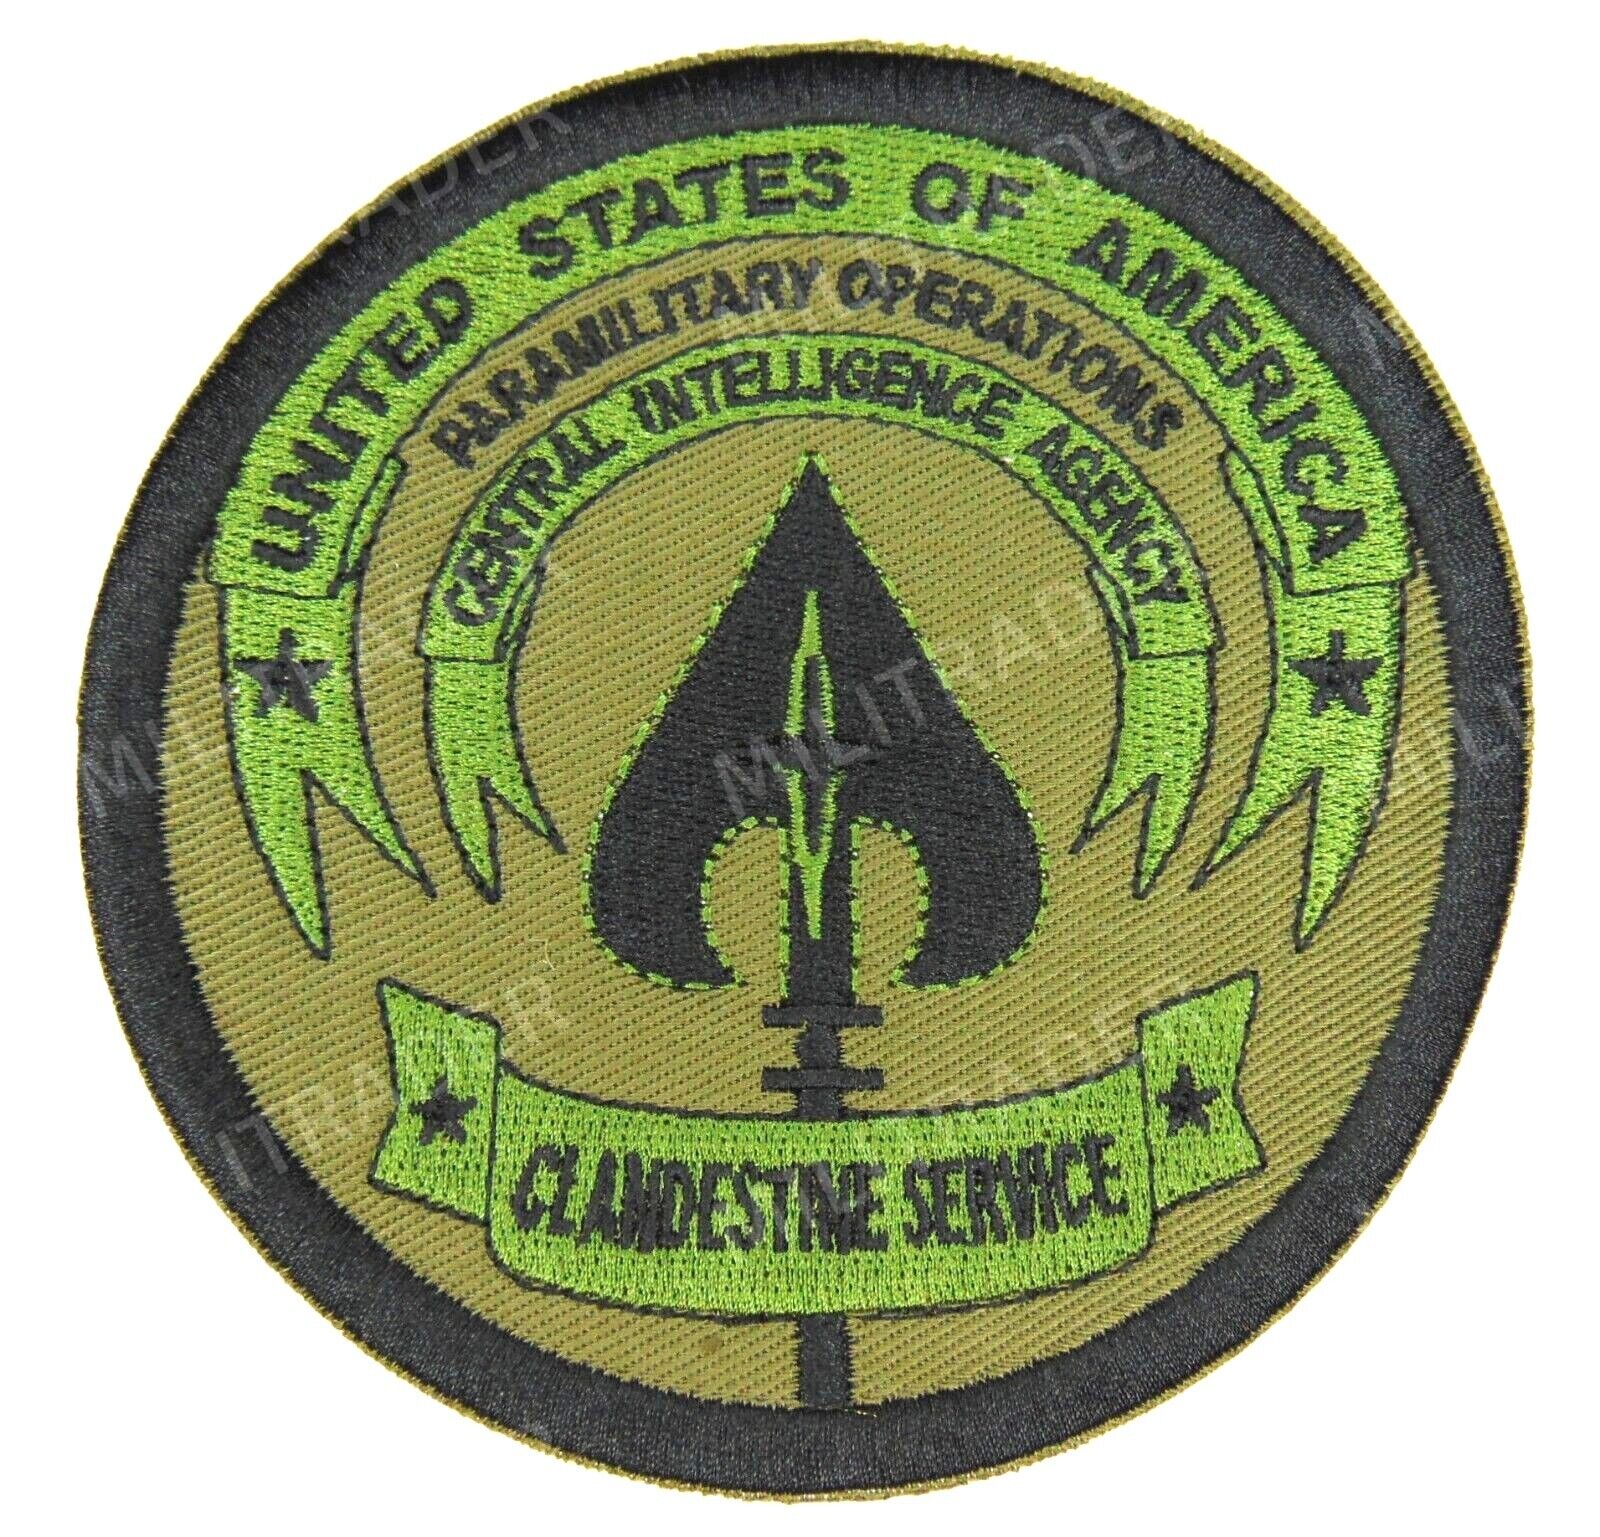 CIA USA Paramilitary Operations Clandestine Service Patch (Iron-on) OD/Subdued